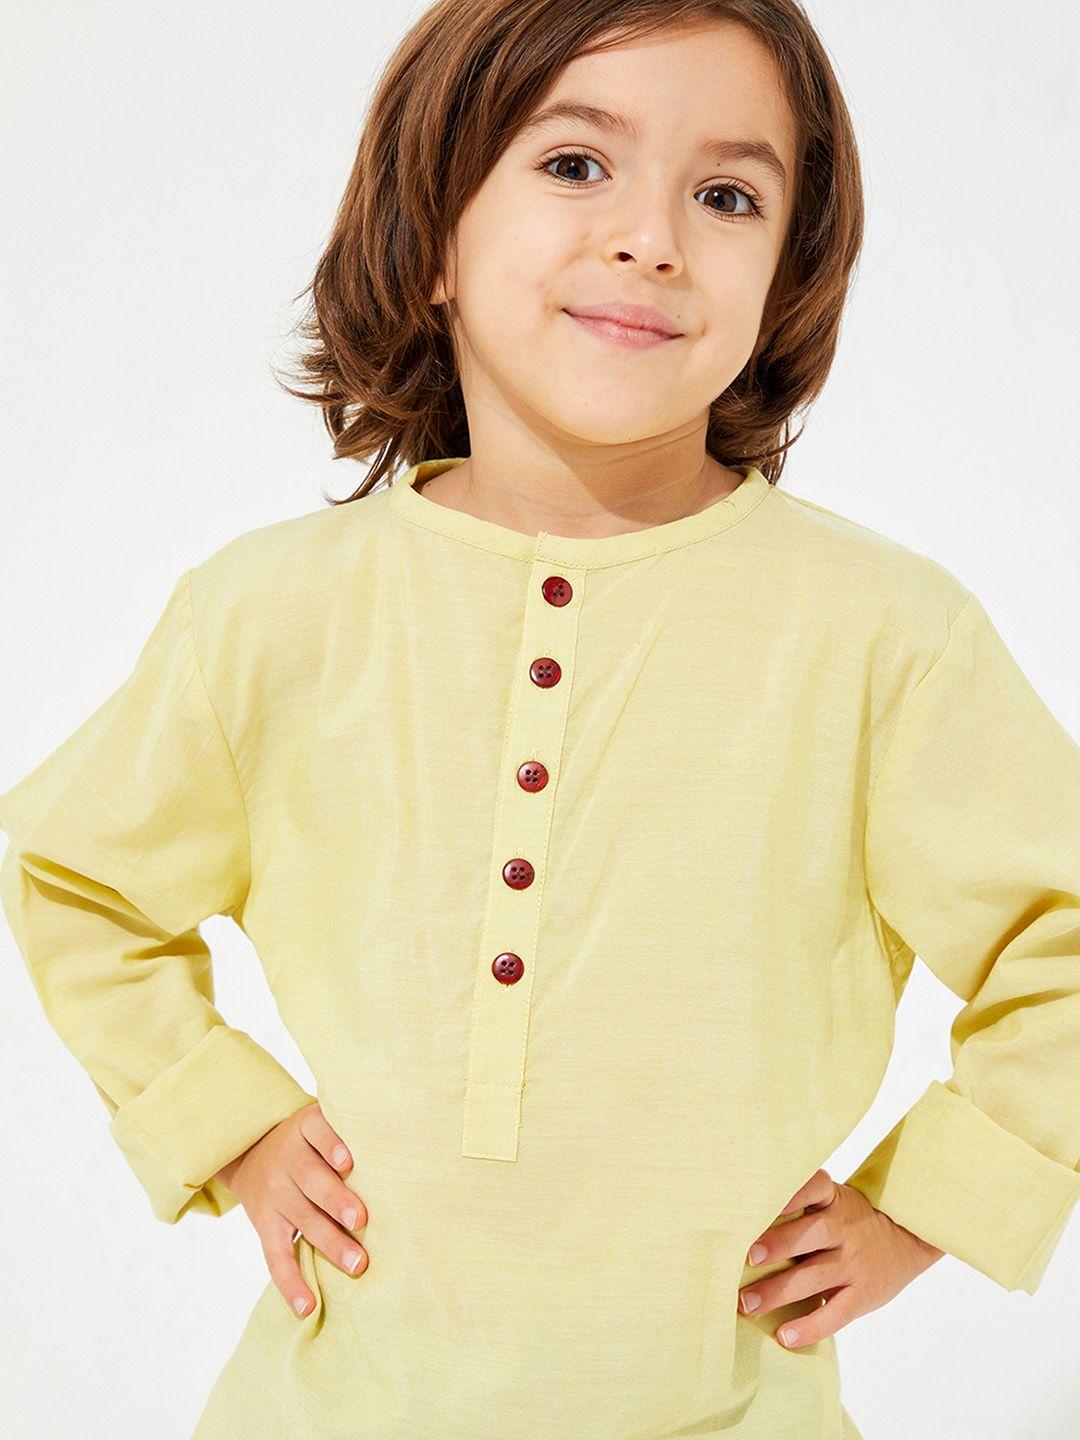 cherry-crumble-boys-yellow-solid-casual-shirt